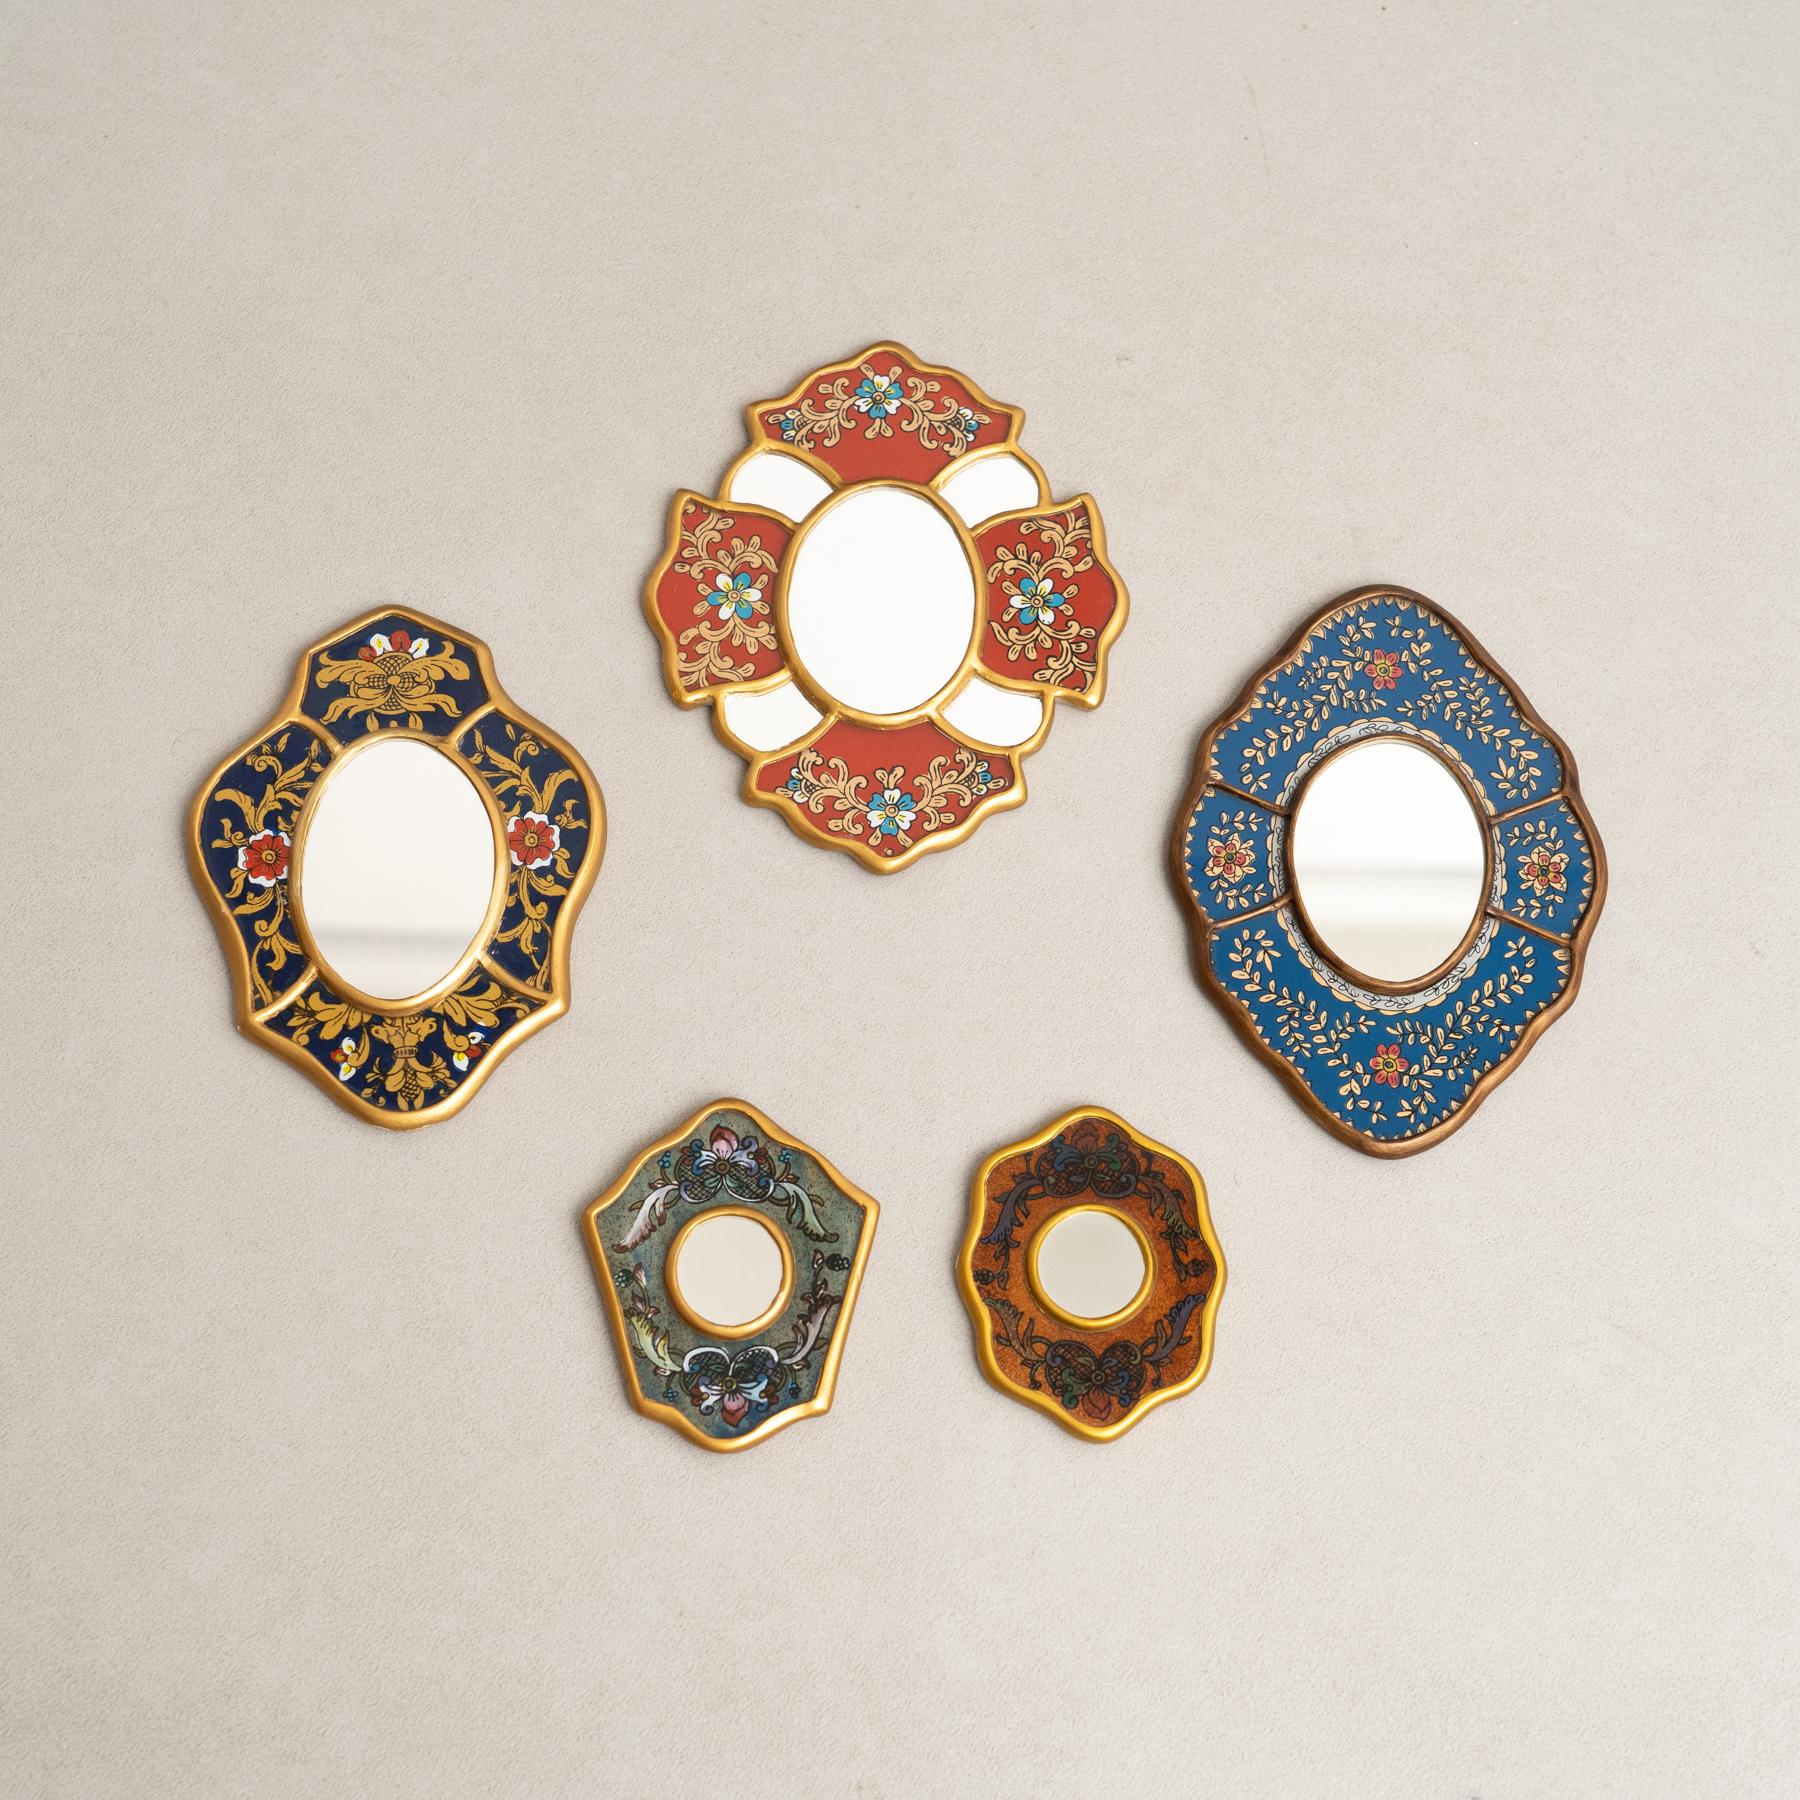 Set of Five Vintage Peruvian Mid-Century Hand-Painted Wooden Wall Mirrors.

Immerse yourself in the captivating charm of mid-century design with this remarkable collection of five hand-painted wooden wall mirrors, originating from 1960s Peru. Each